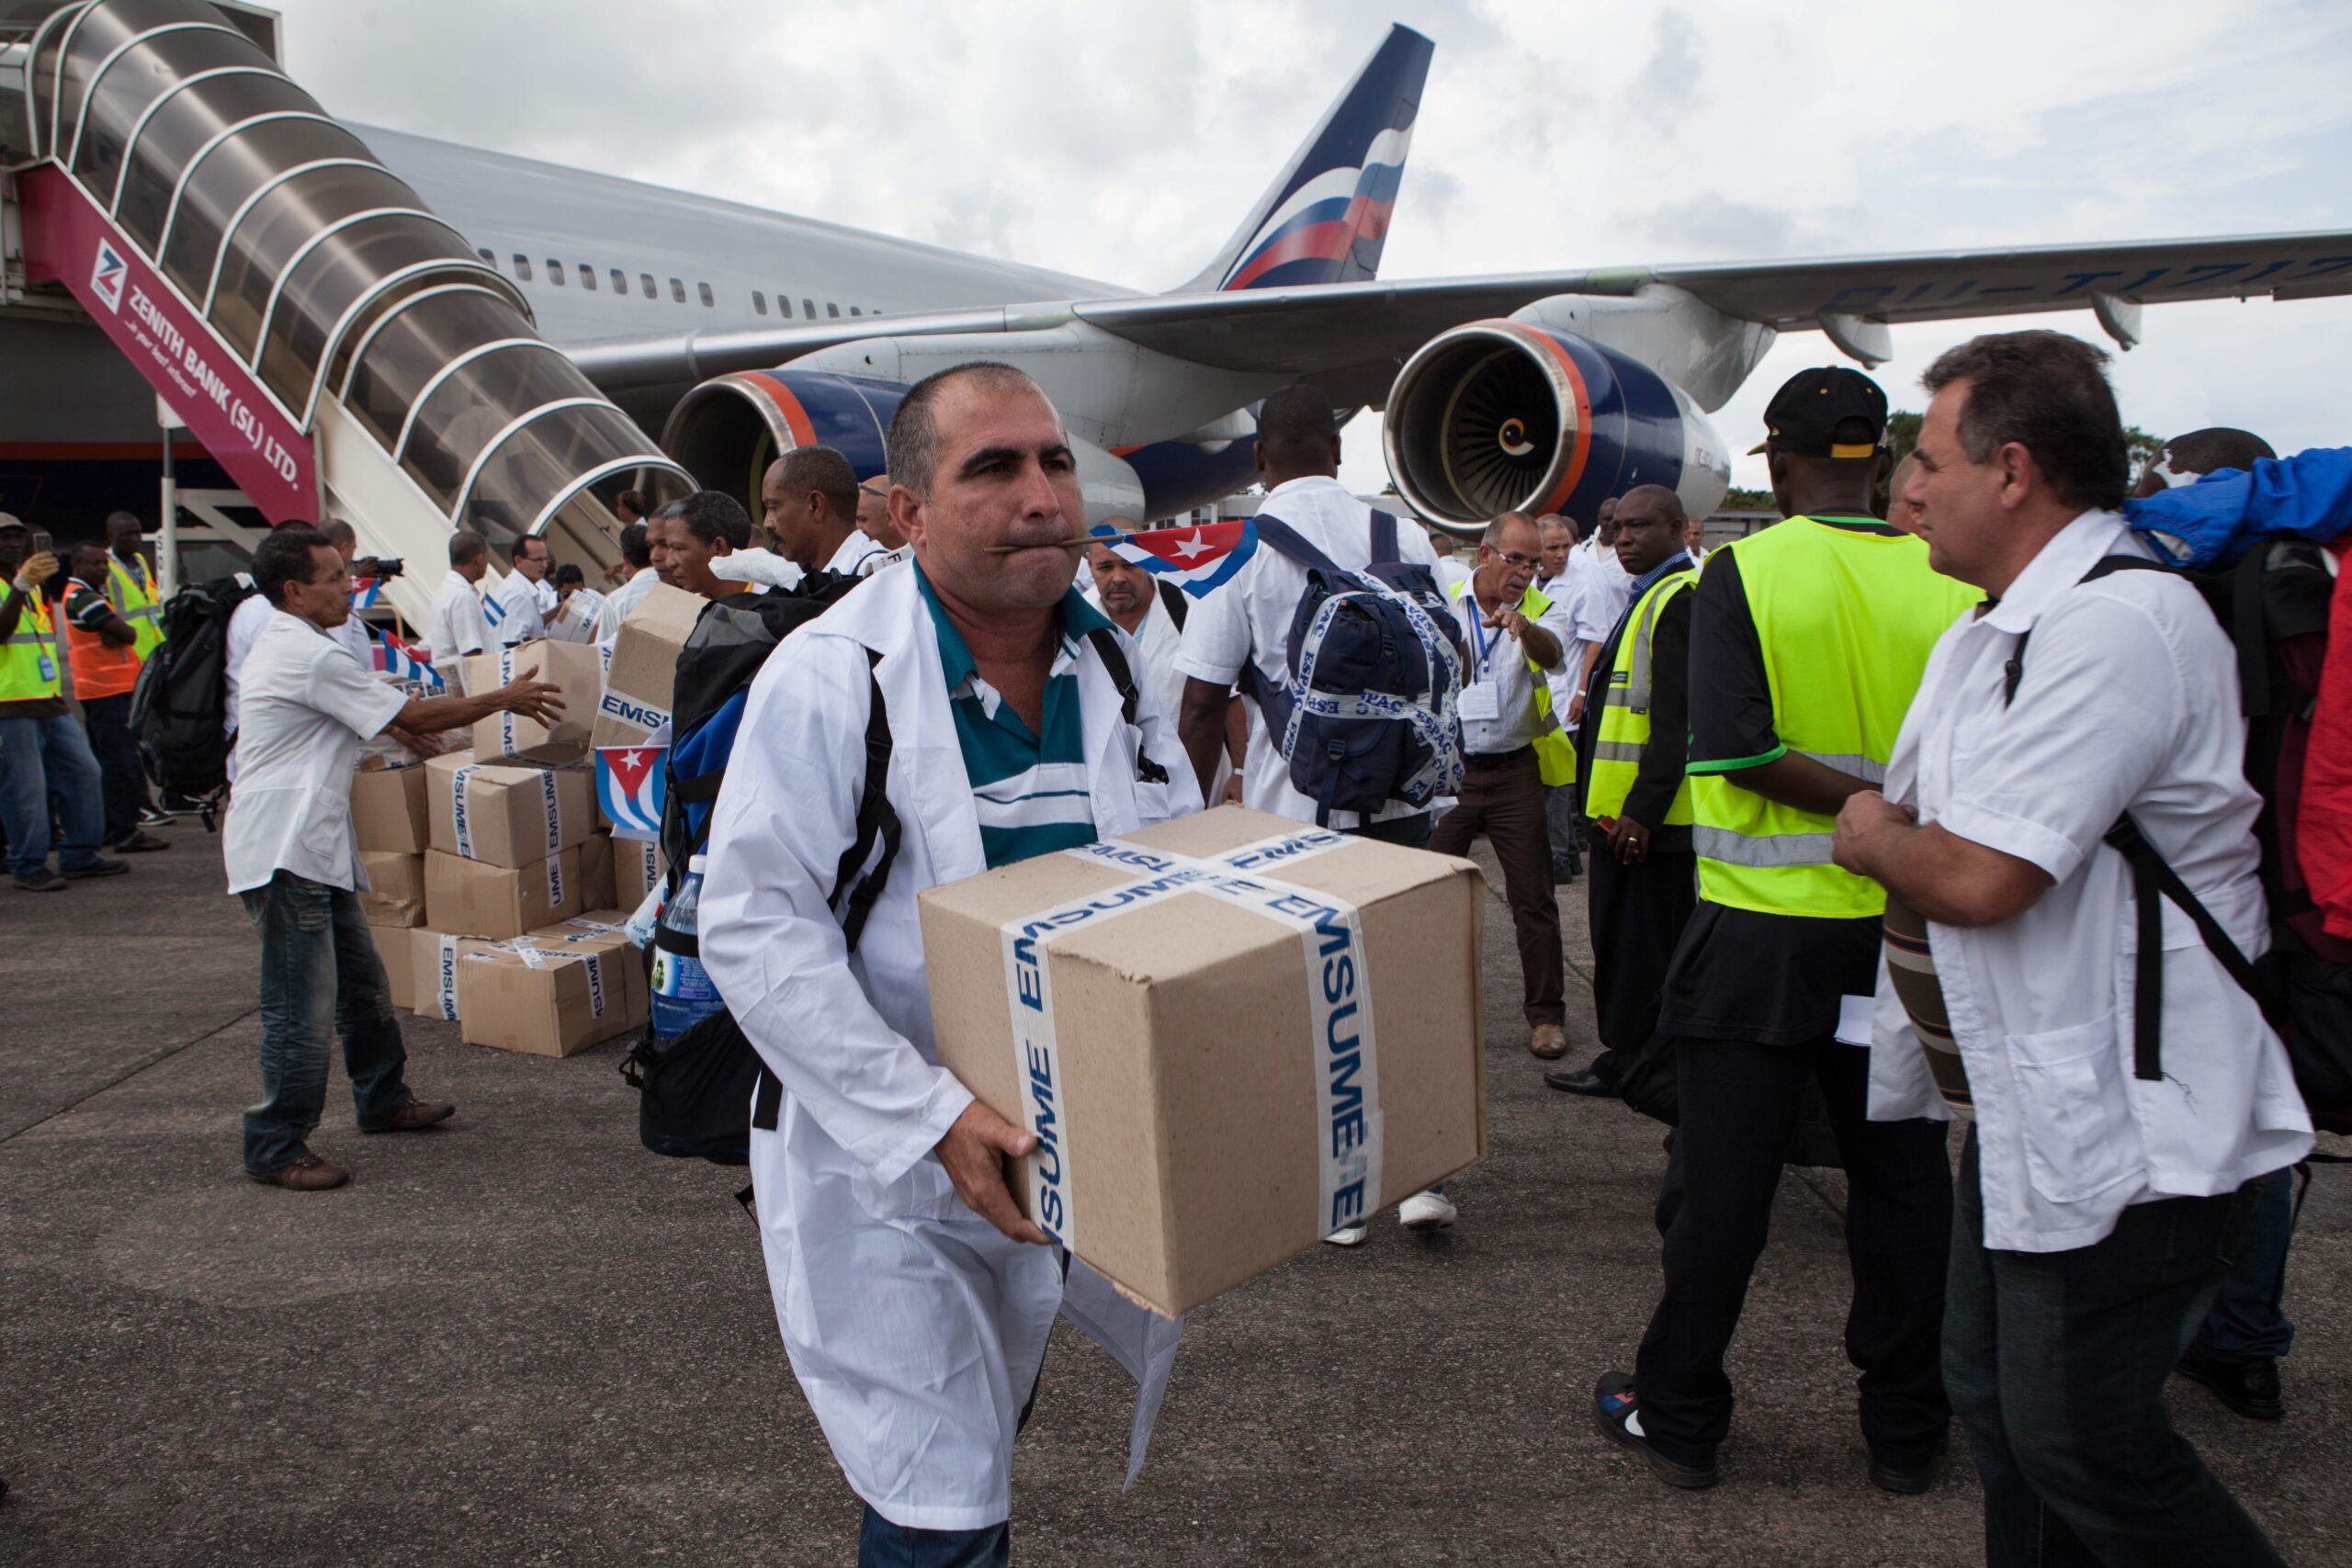 The first members of a team of 165 Cuban doctors and health workers unload boxes of medicines and medical material from a plane upon their arrival at Freetown's airport to help the fight against Ebola in Sierra Leone on Thursday. | AFP-JIJI